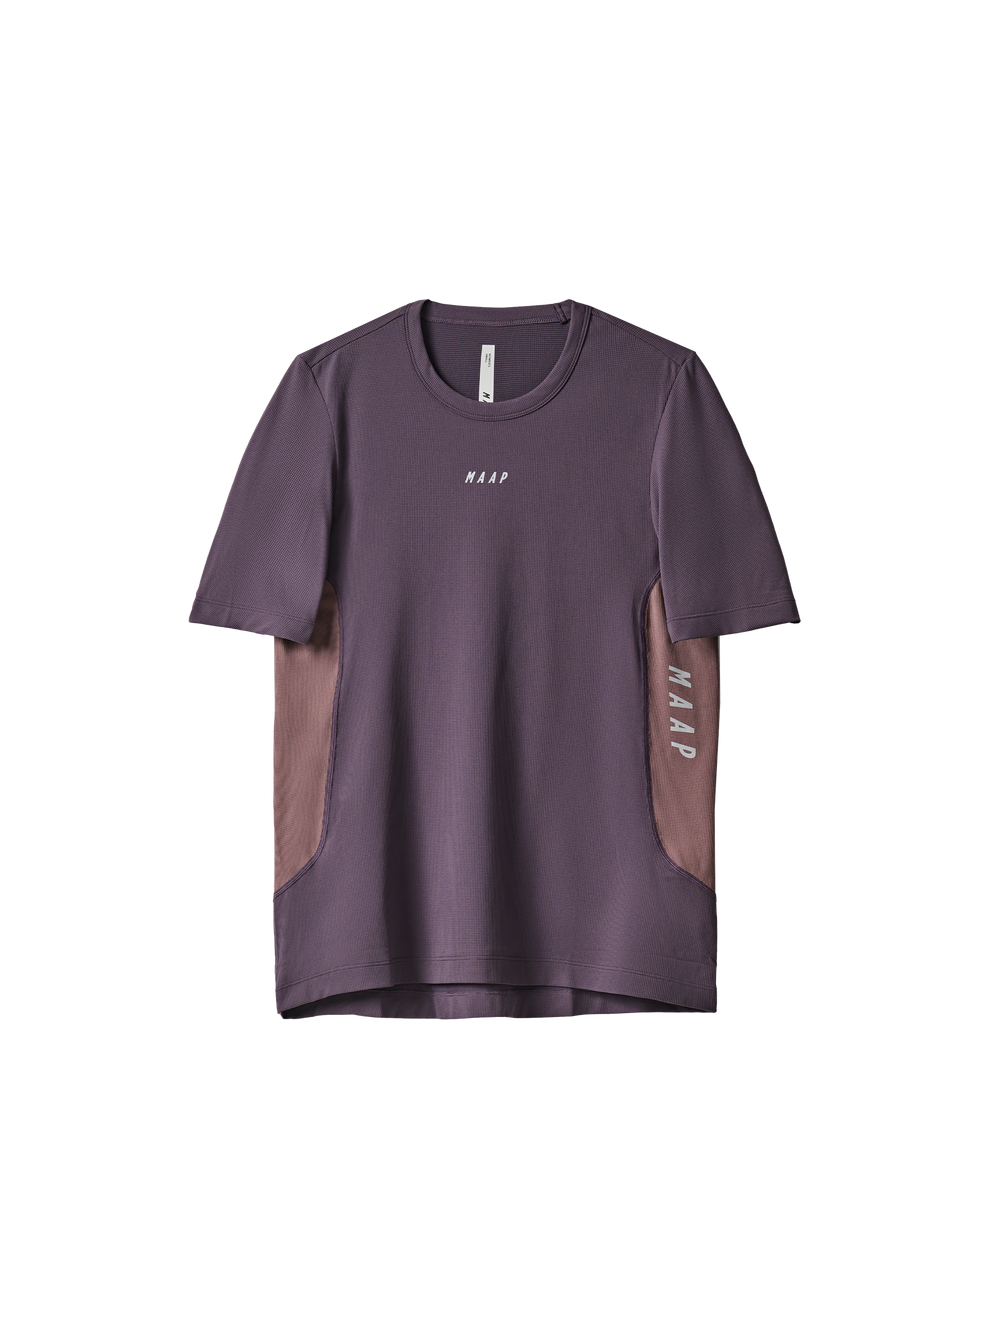 Product Image for Women's Alt_Road Tech Tee